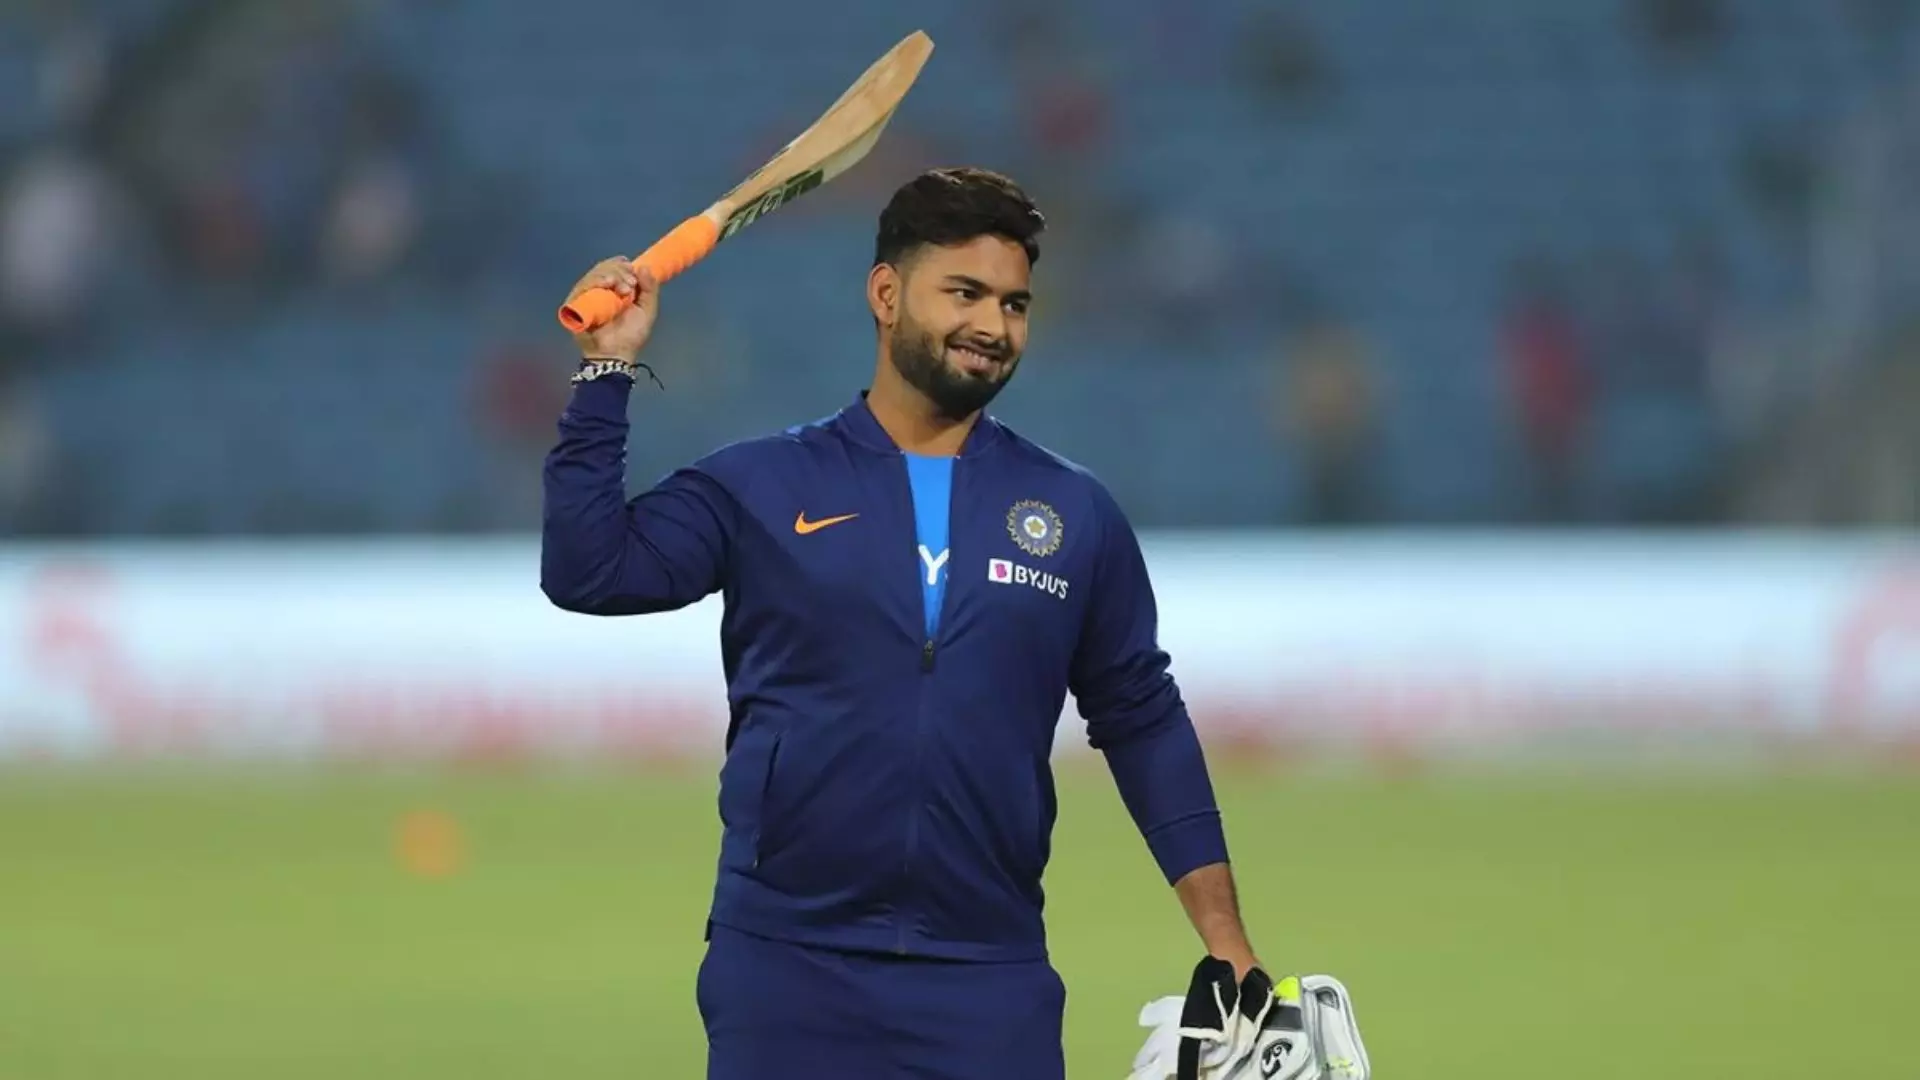 Team India Wicket Keeper Rishabh Pant Lucky Number Repeats Unexpectly in India vs New Zealand T20 Match